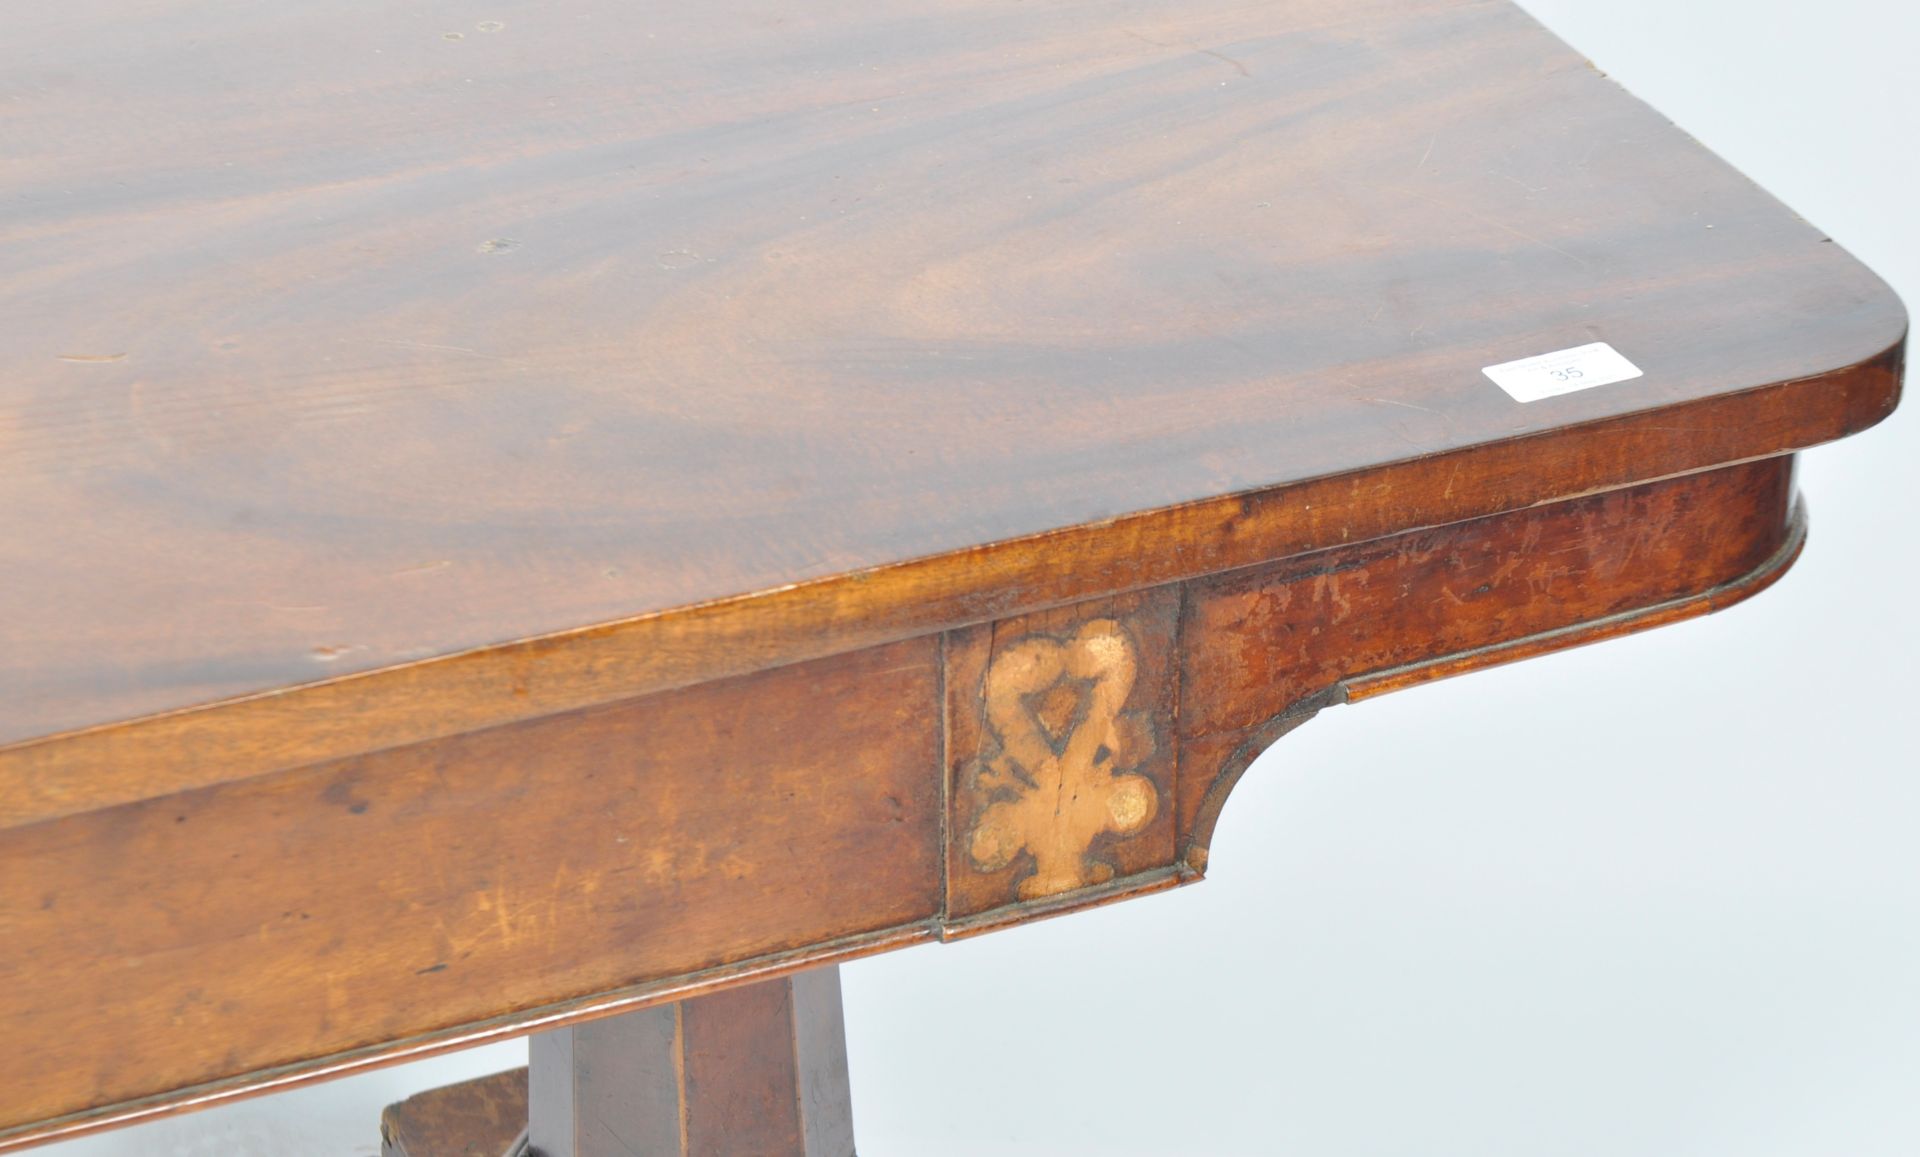 ANTIQUE 19TH CENTURY MAHOGANY LIBRARY TABLE - Image 6 of 11